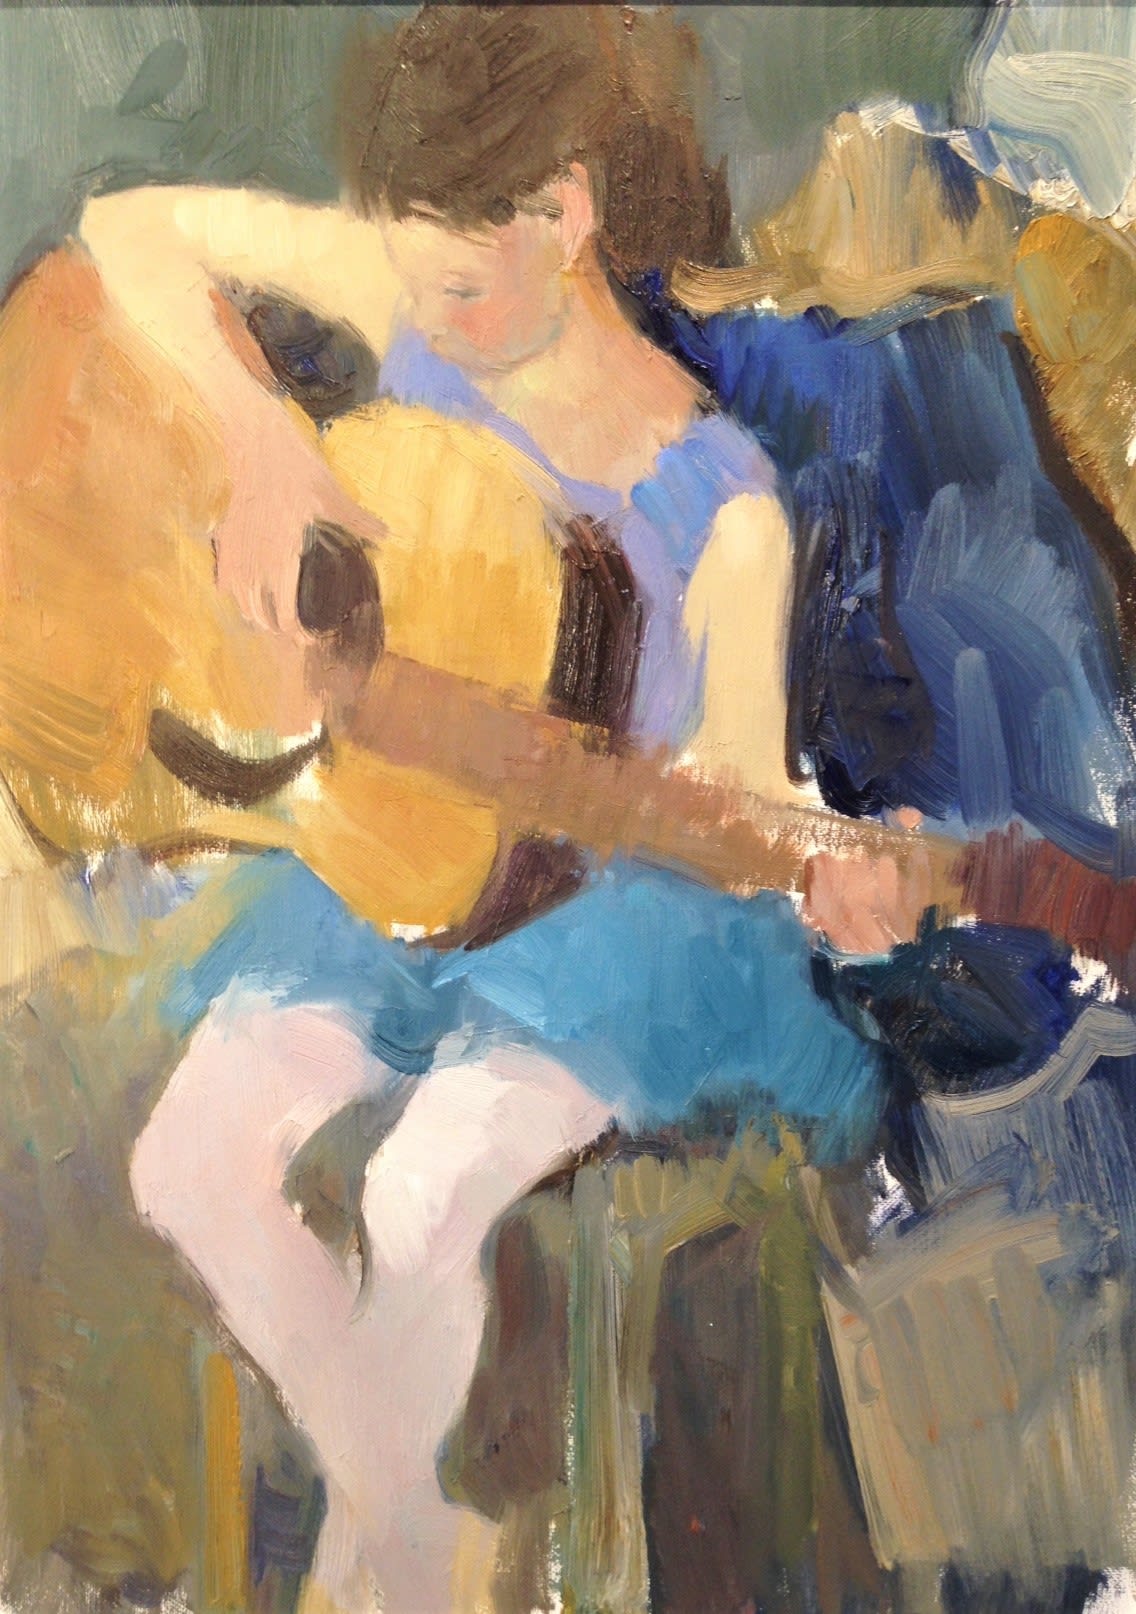 Painting of a dancer demo with Julia Hawkins